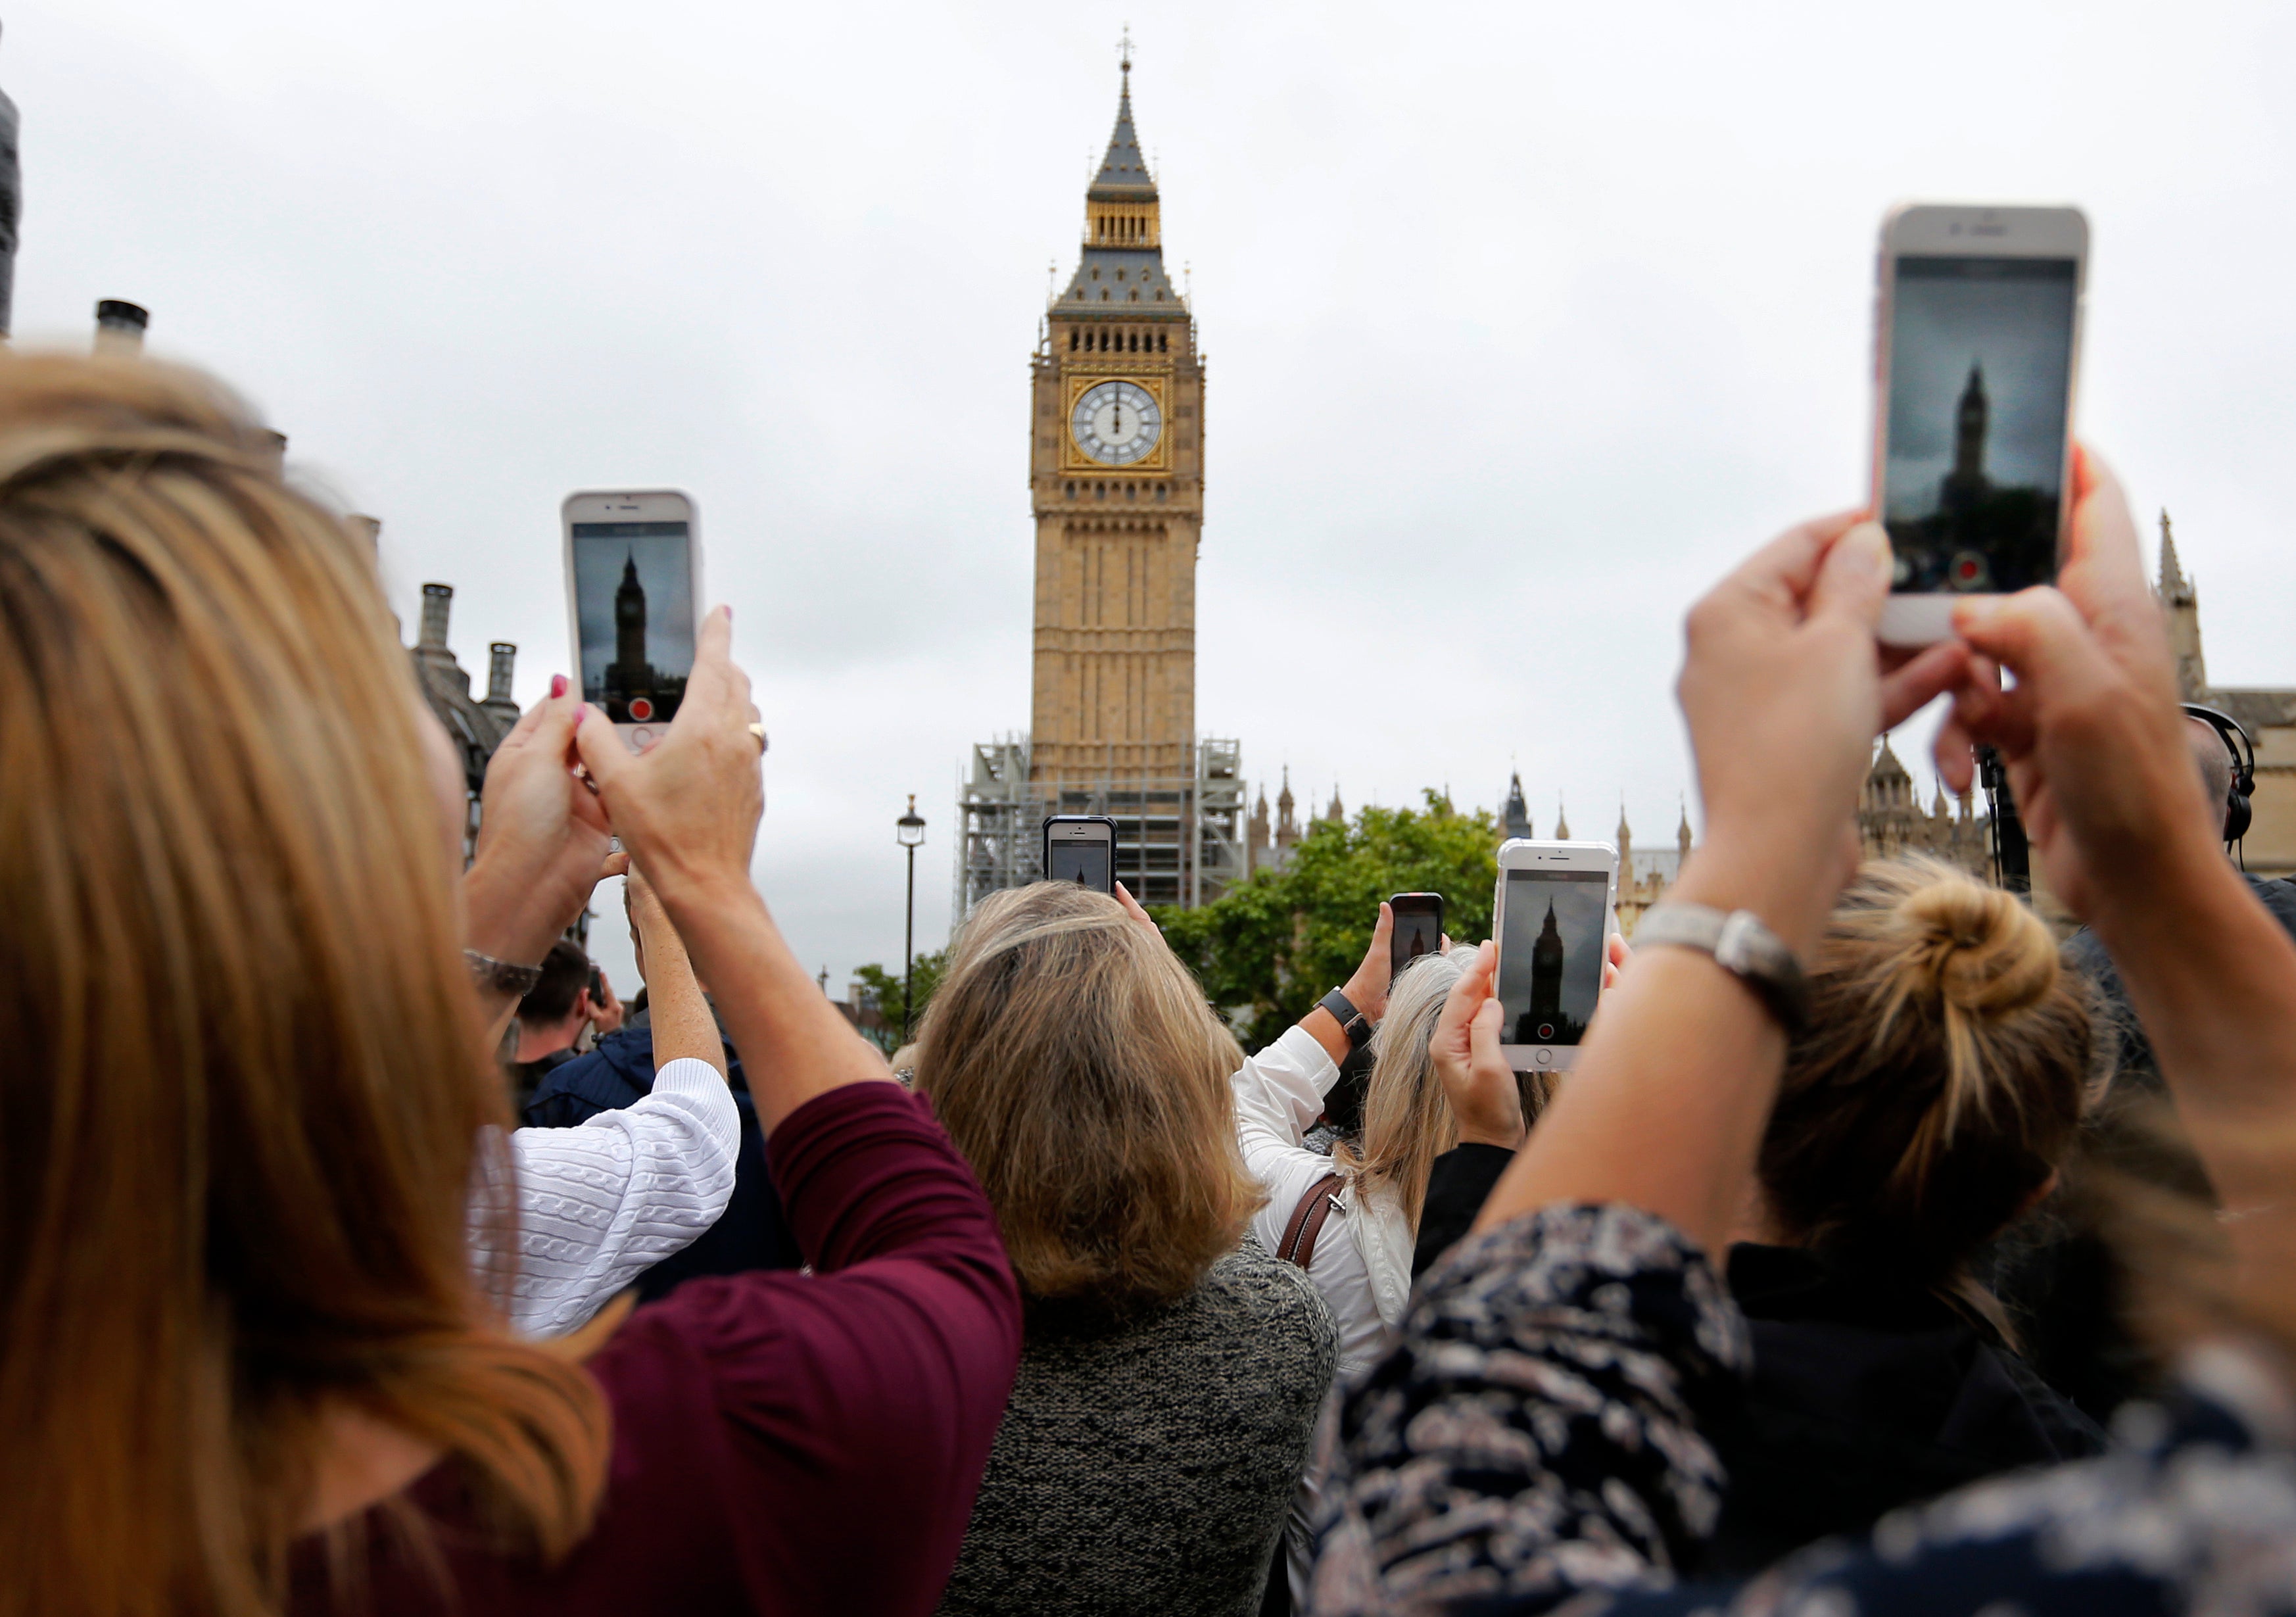 People record the Big Ben clock at Elizabeth Tower in London